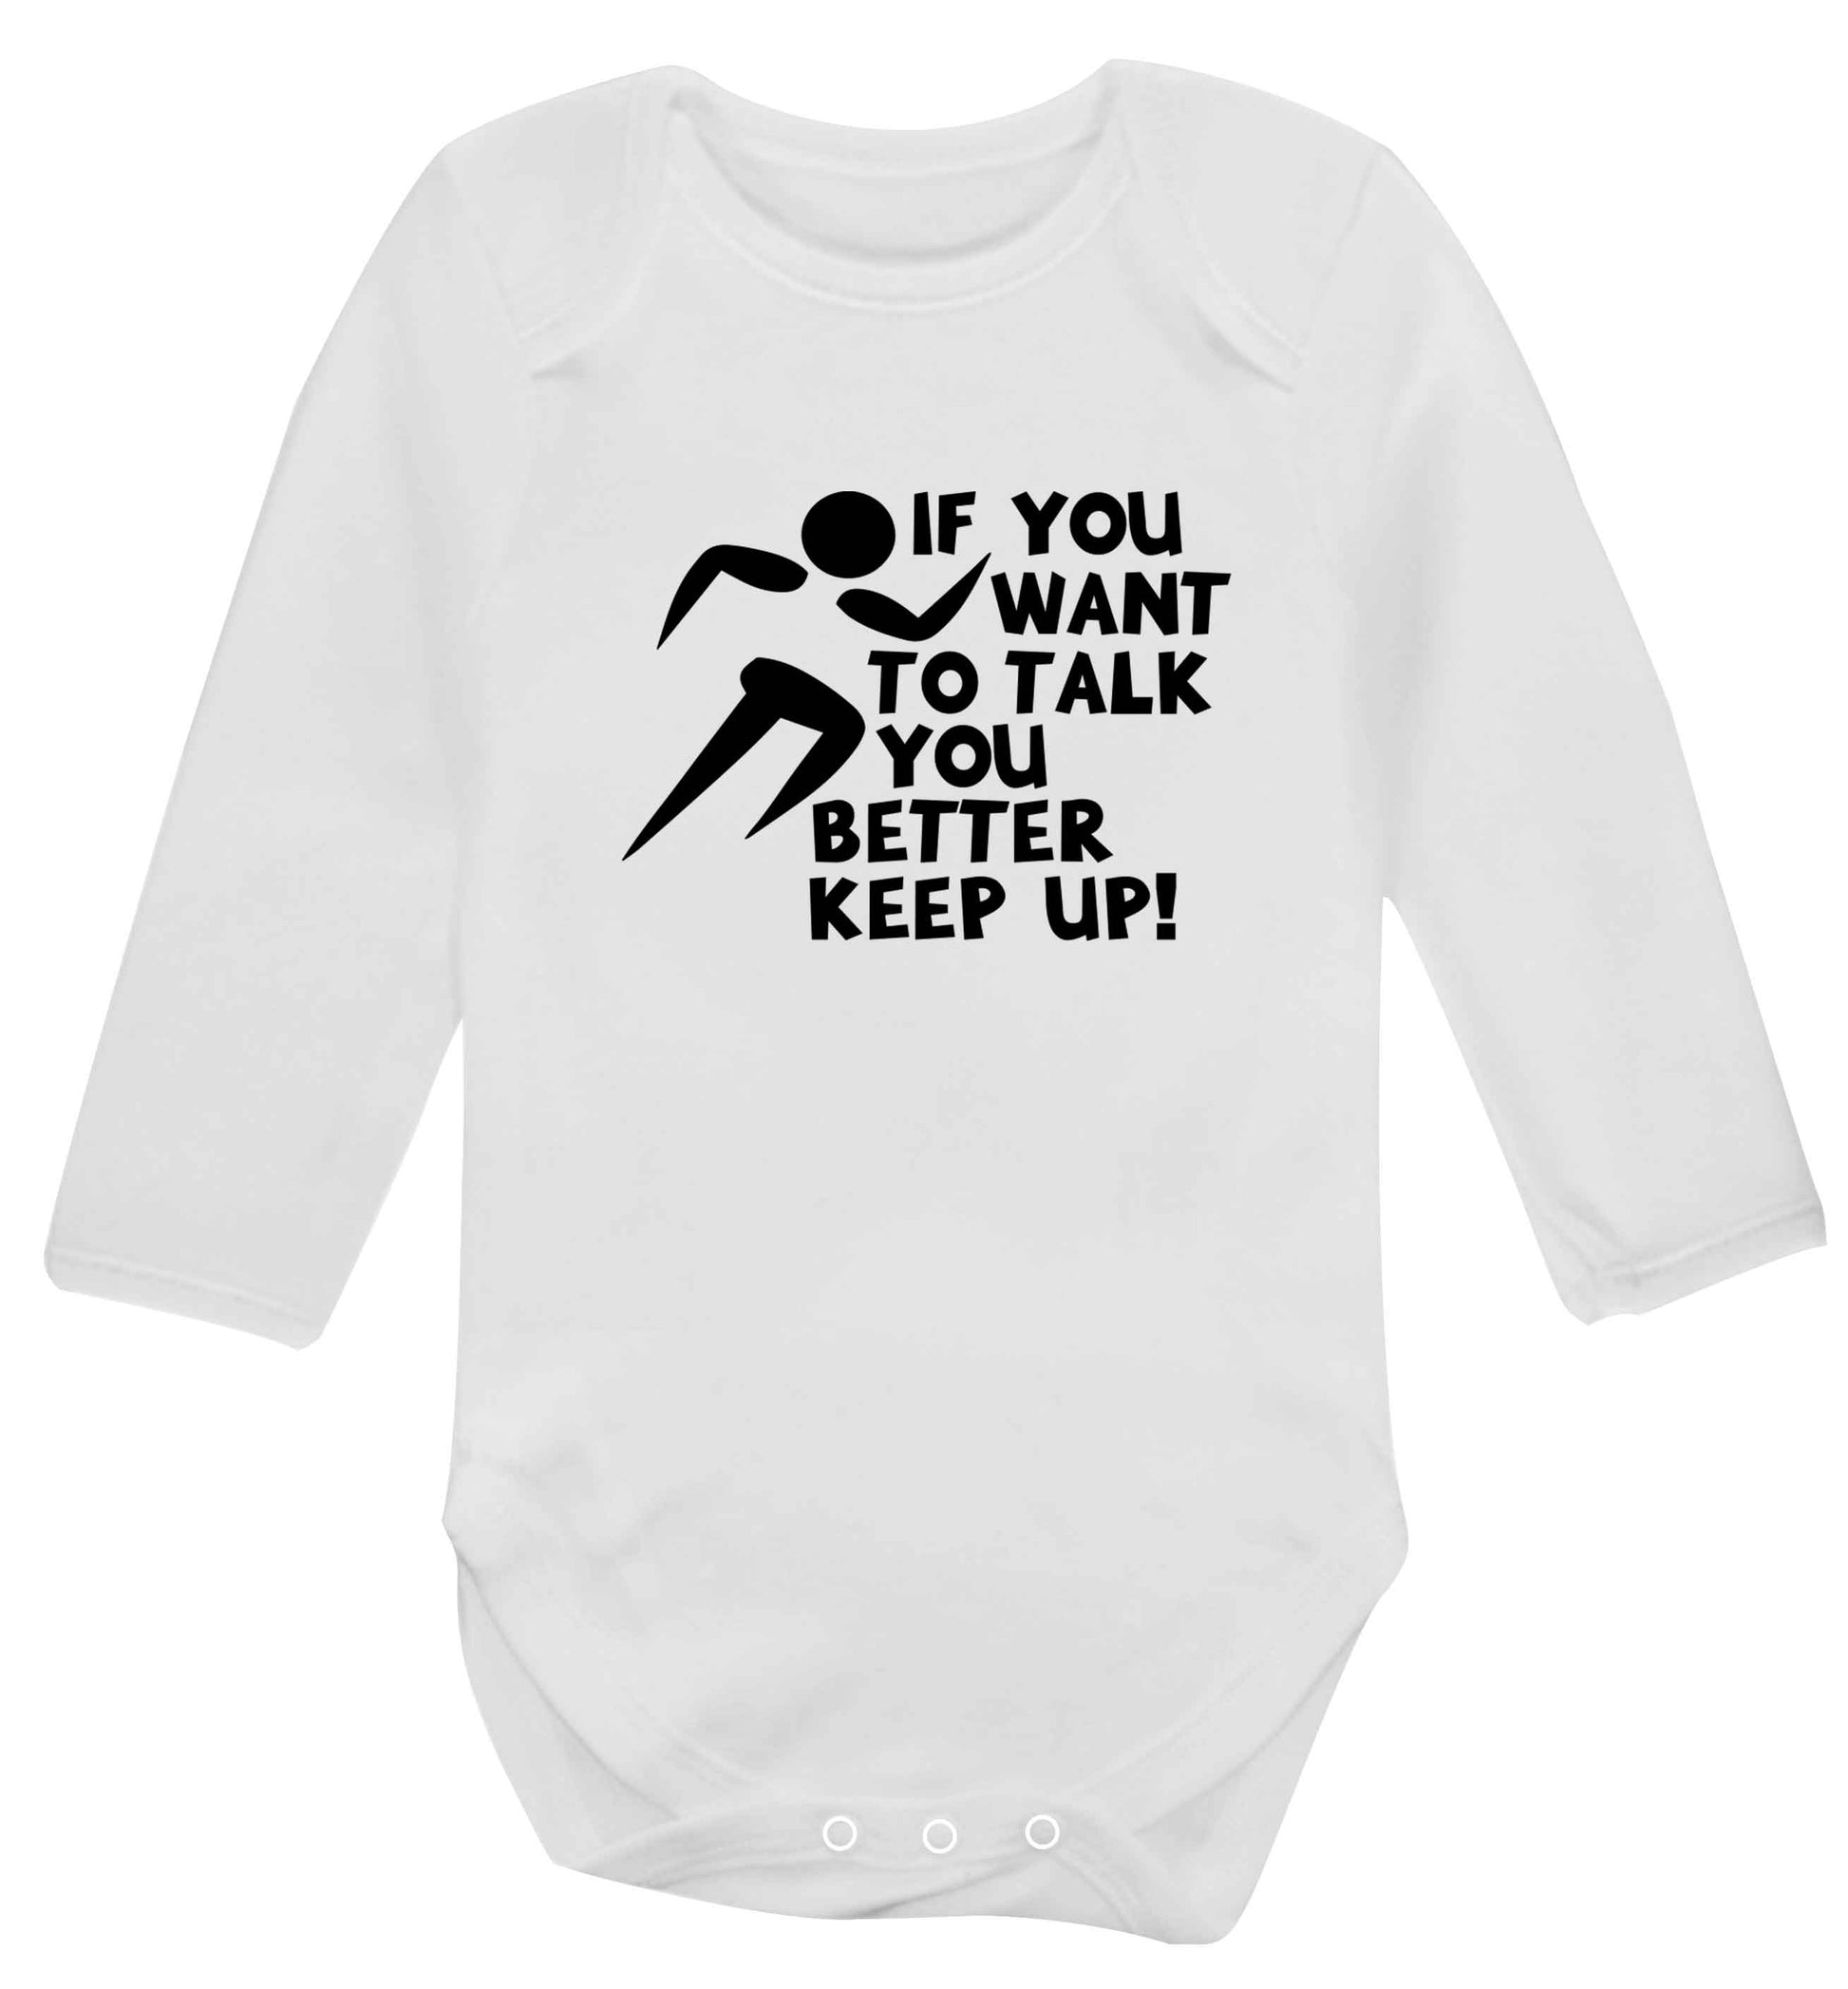 If you want to talk you better keep up! baby vest long sleeved white 6-12 months